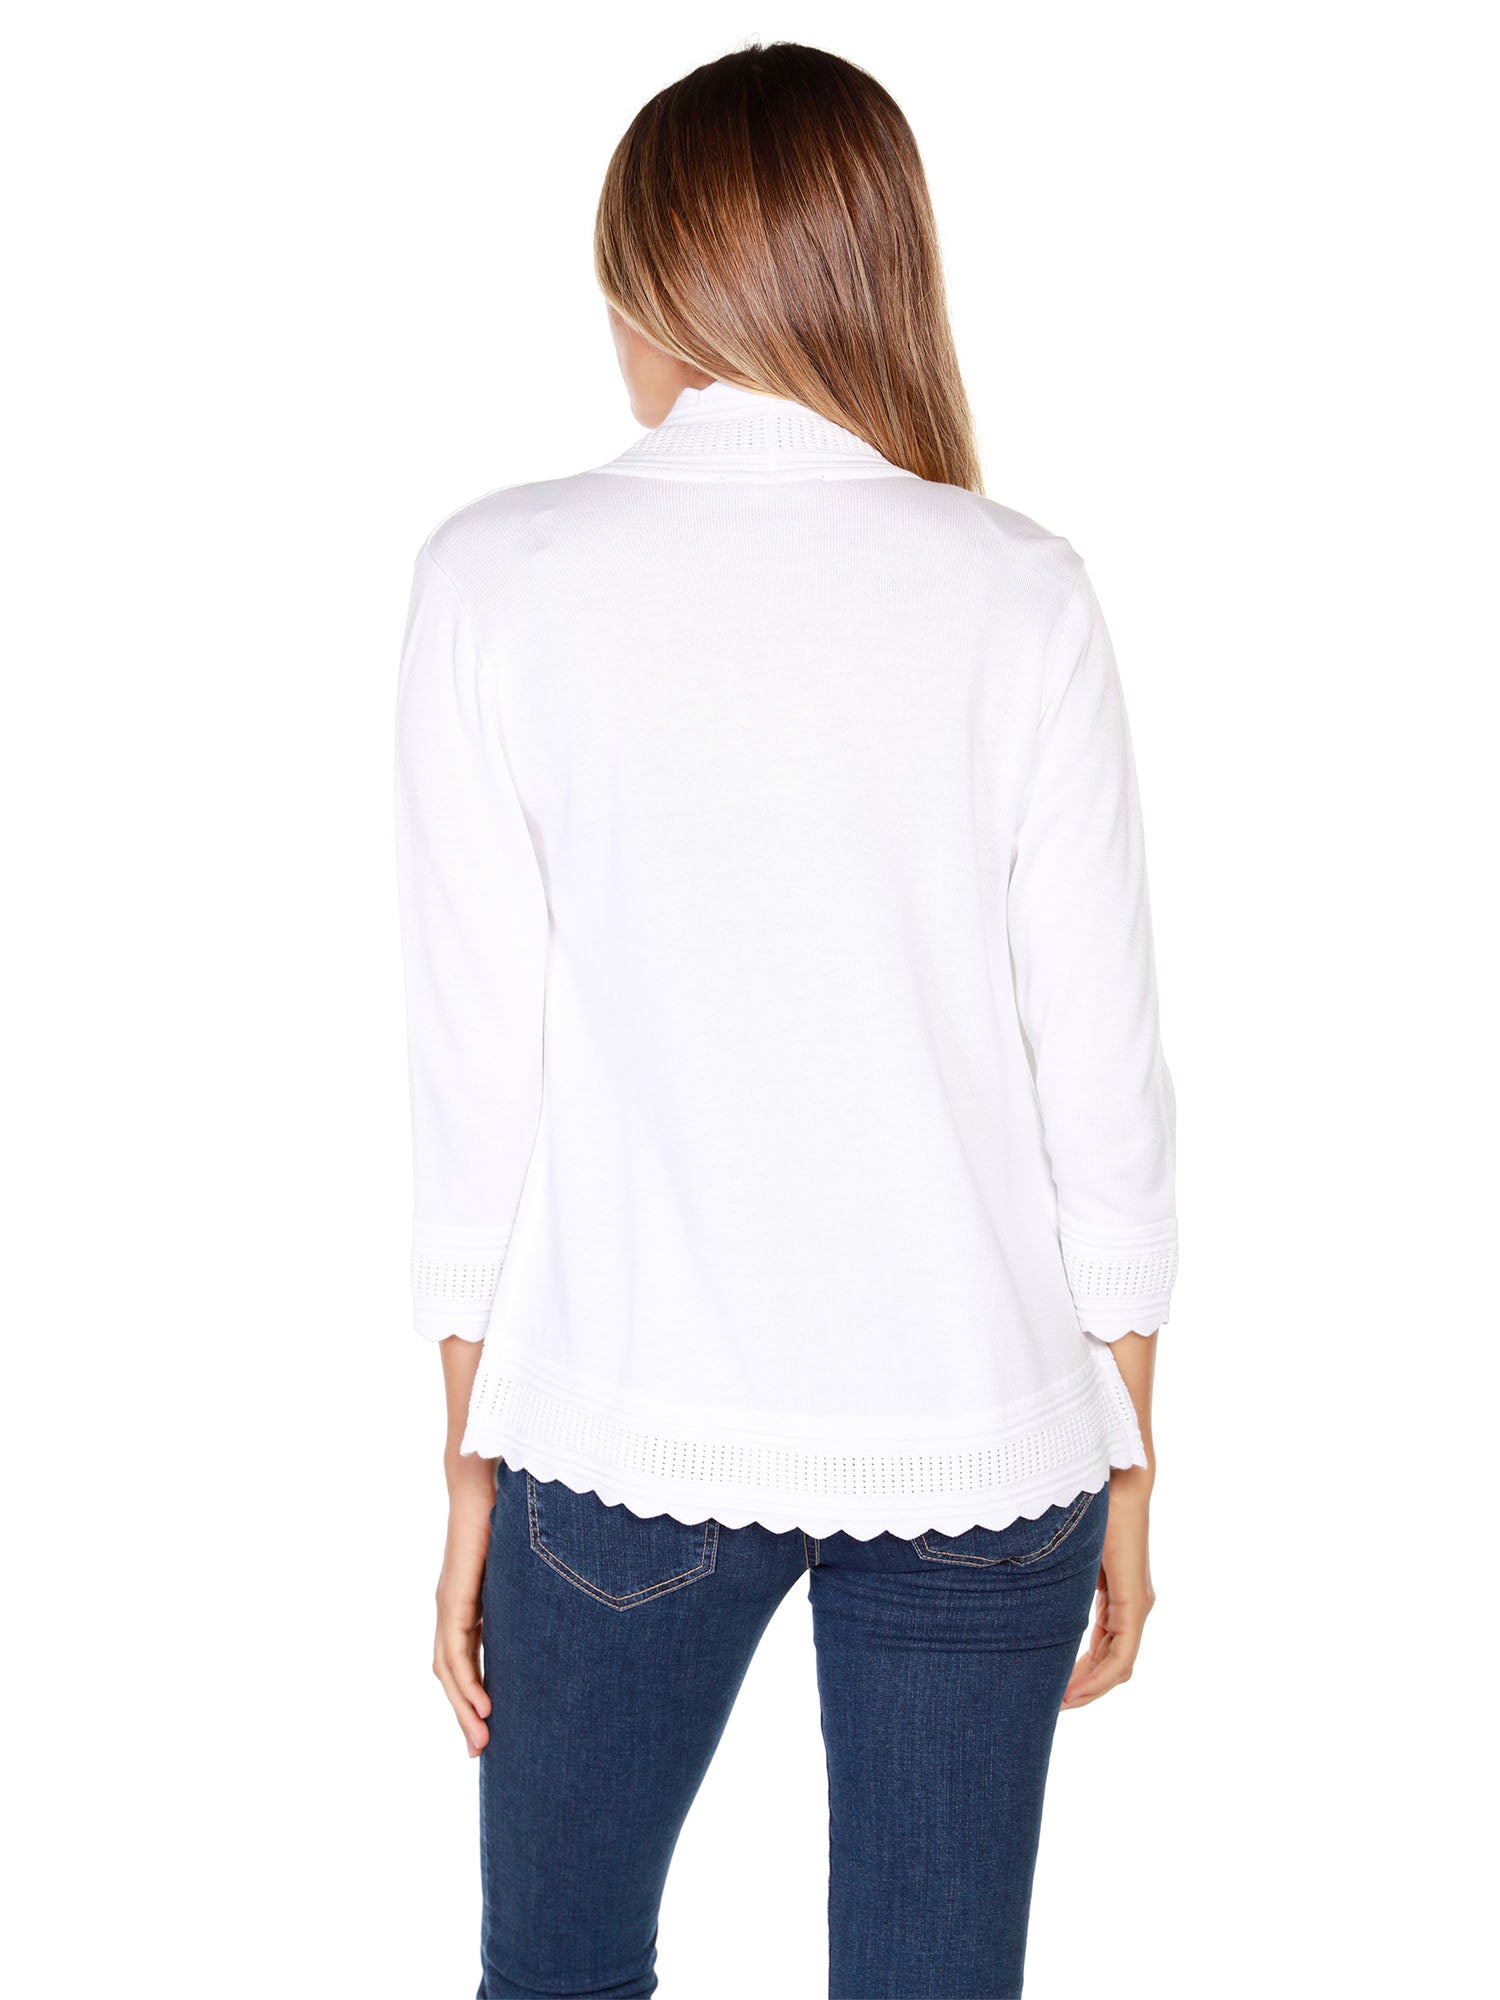 Women's Shrug Cardigan with Rounded Scalloped Edges | Curvy